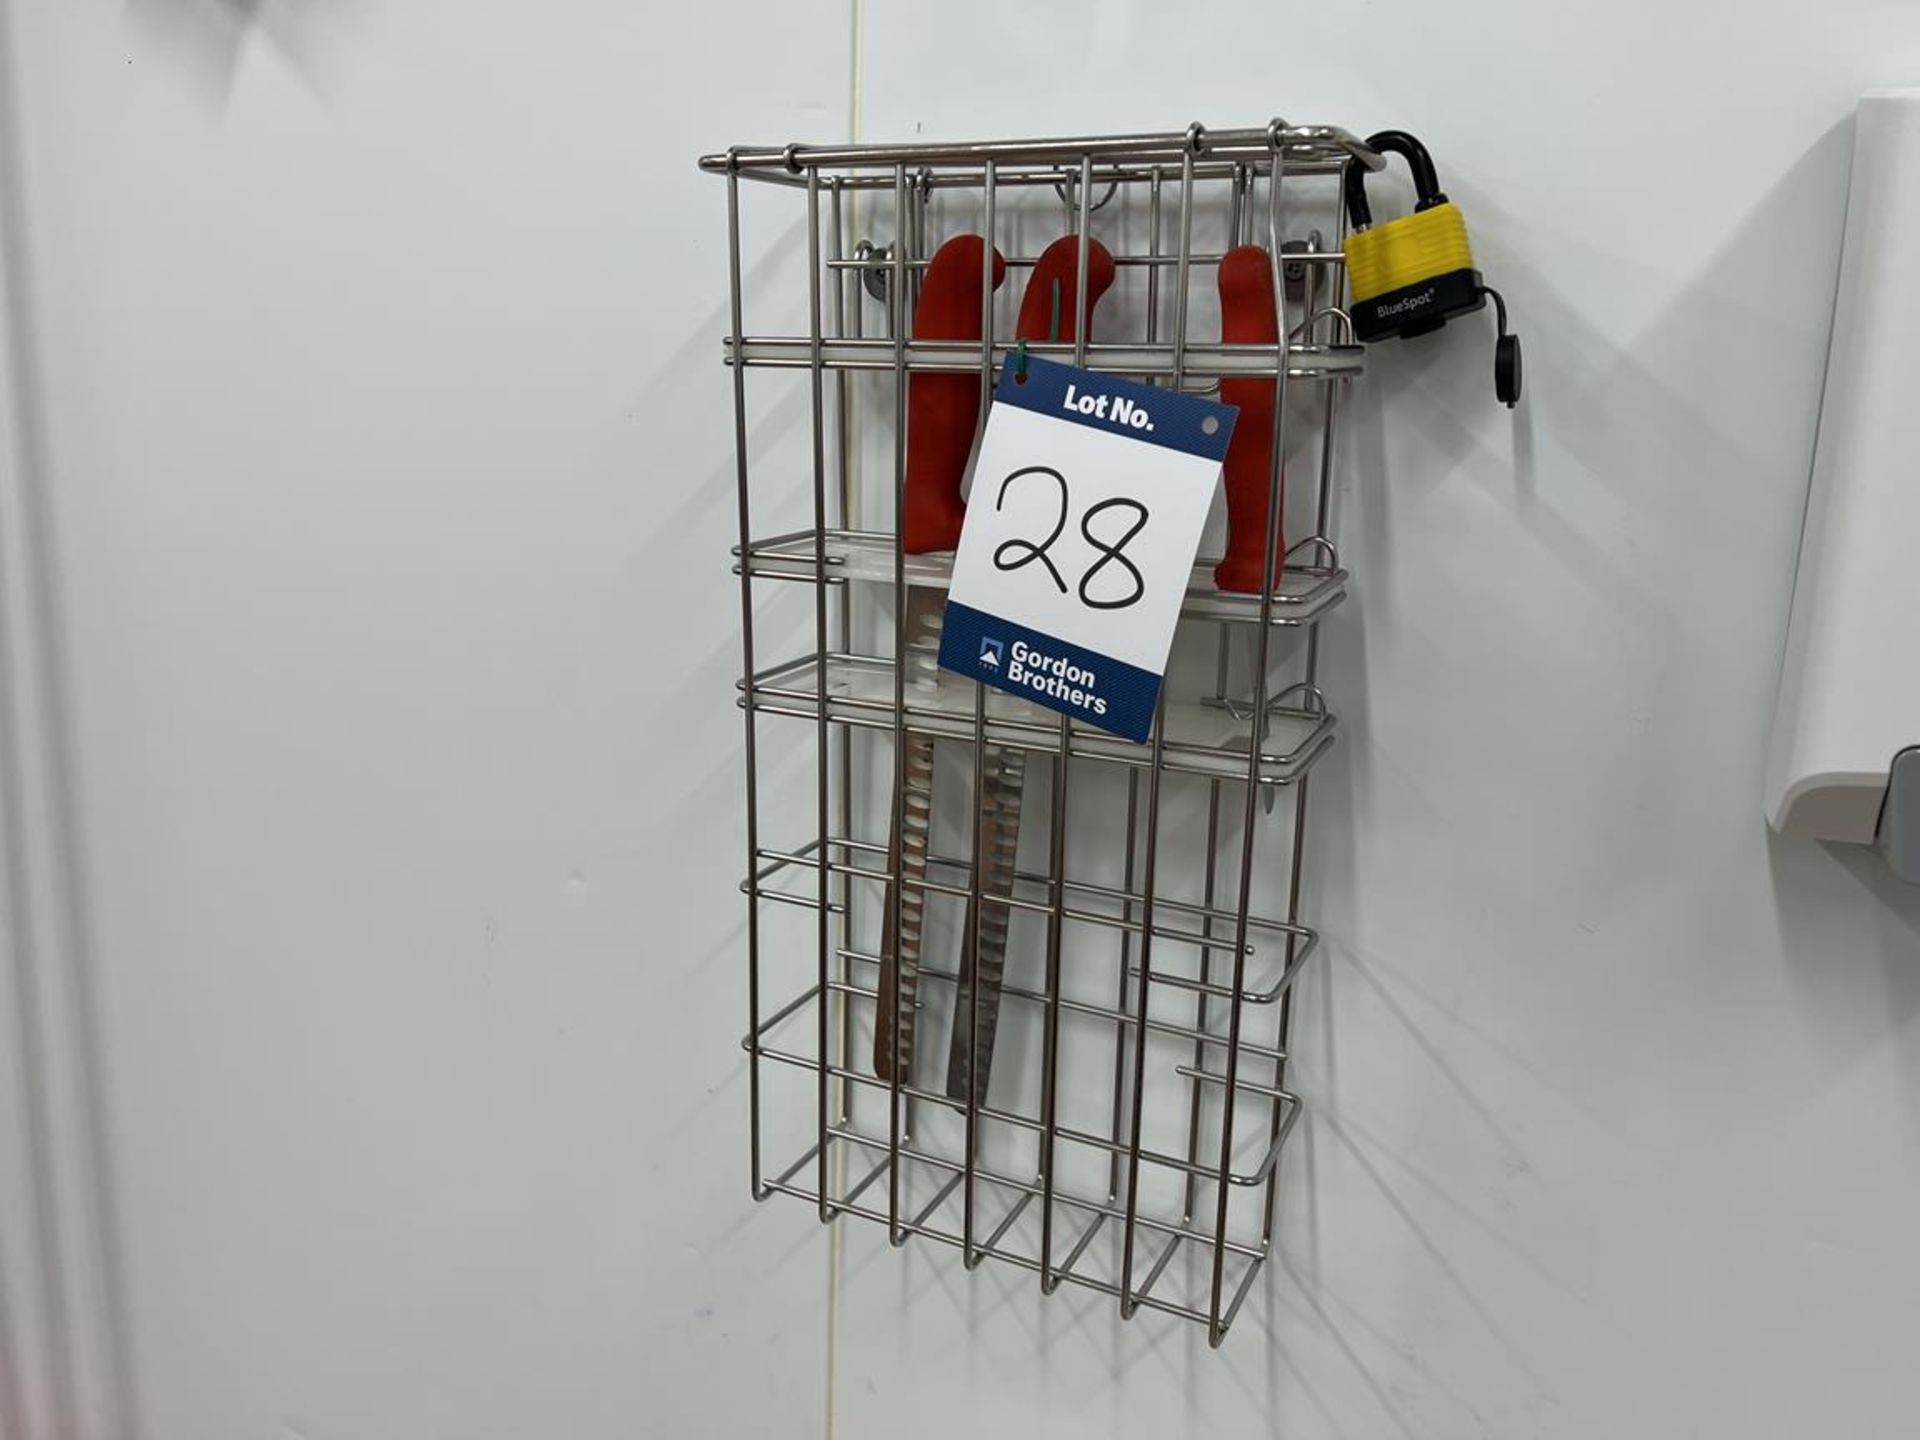 2x (no.) wall mounted stainless steel lockable knife safes with stainless steel cage shelf unit.